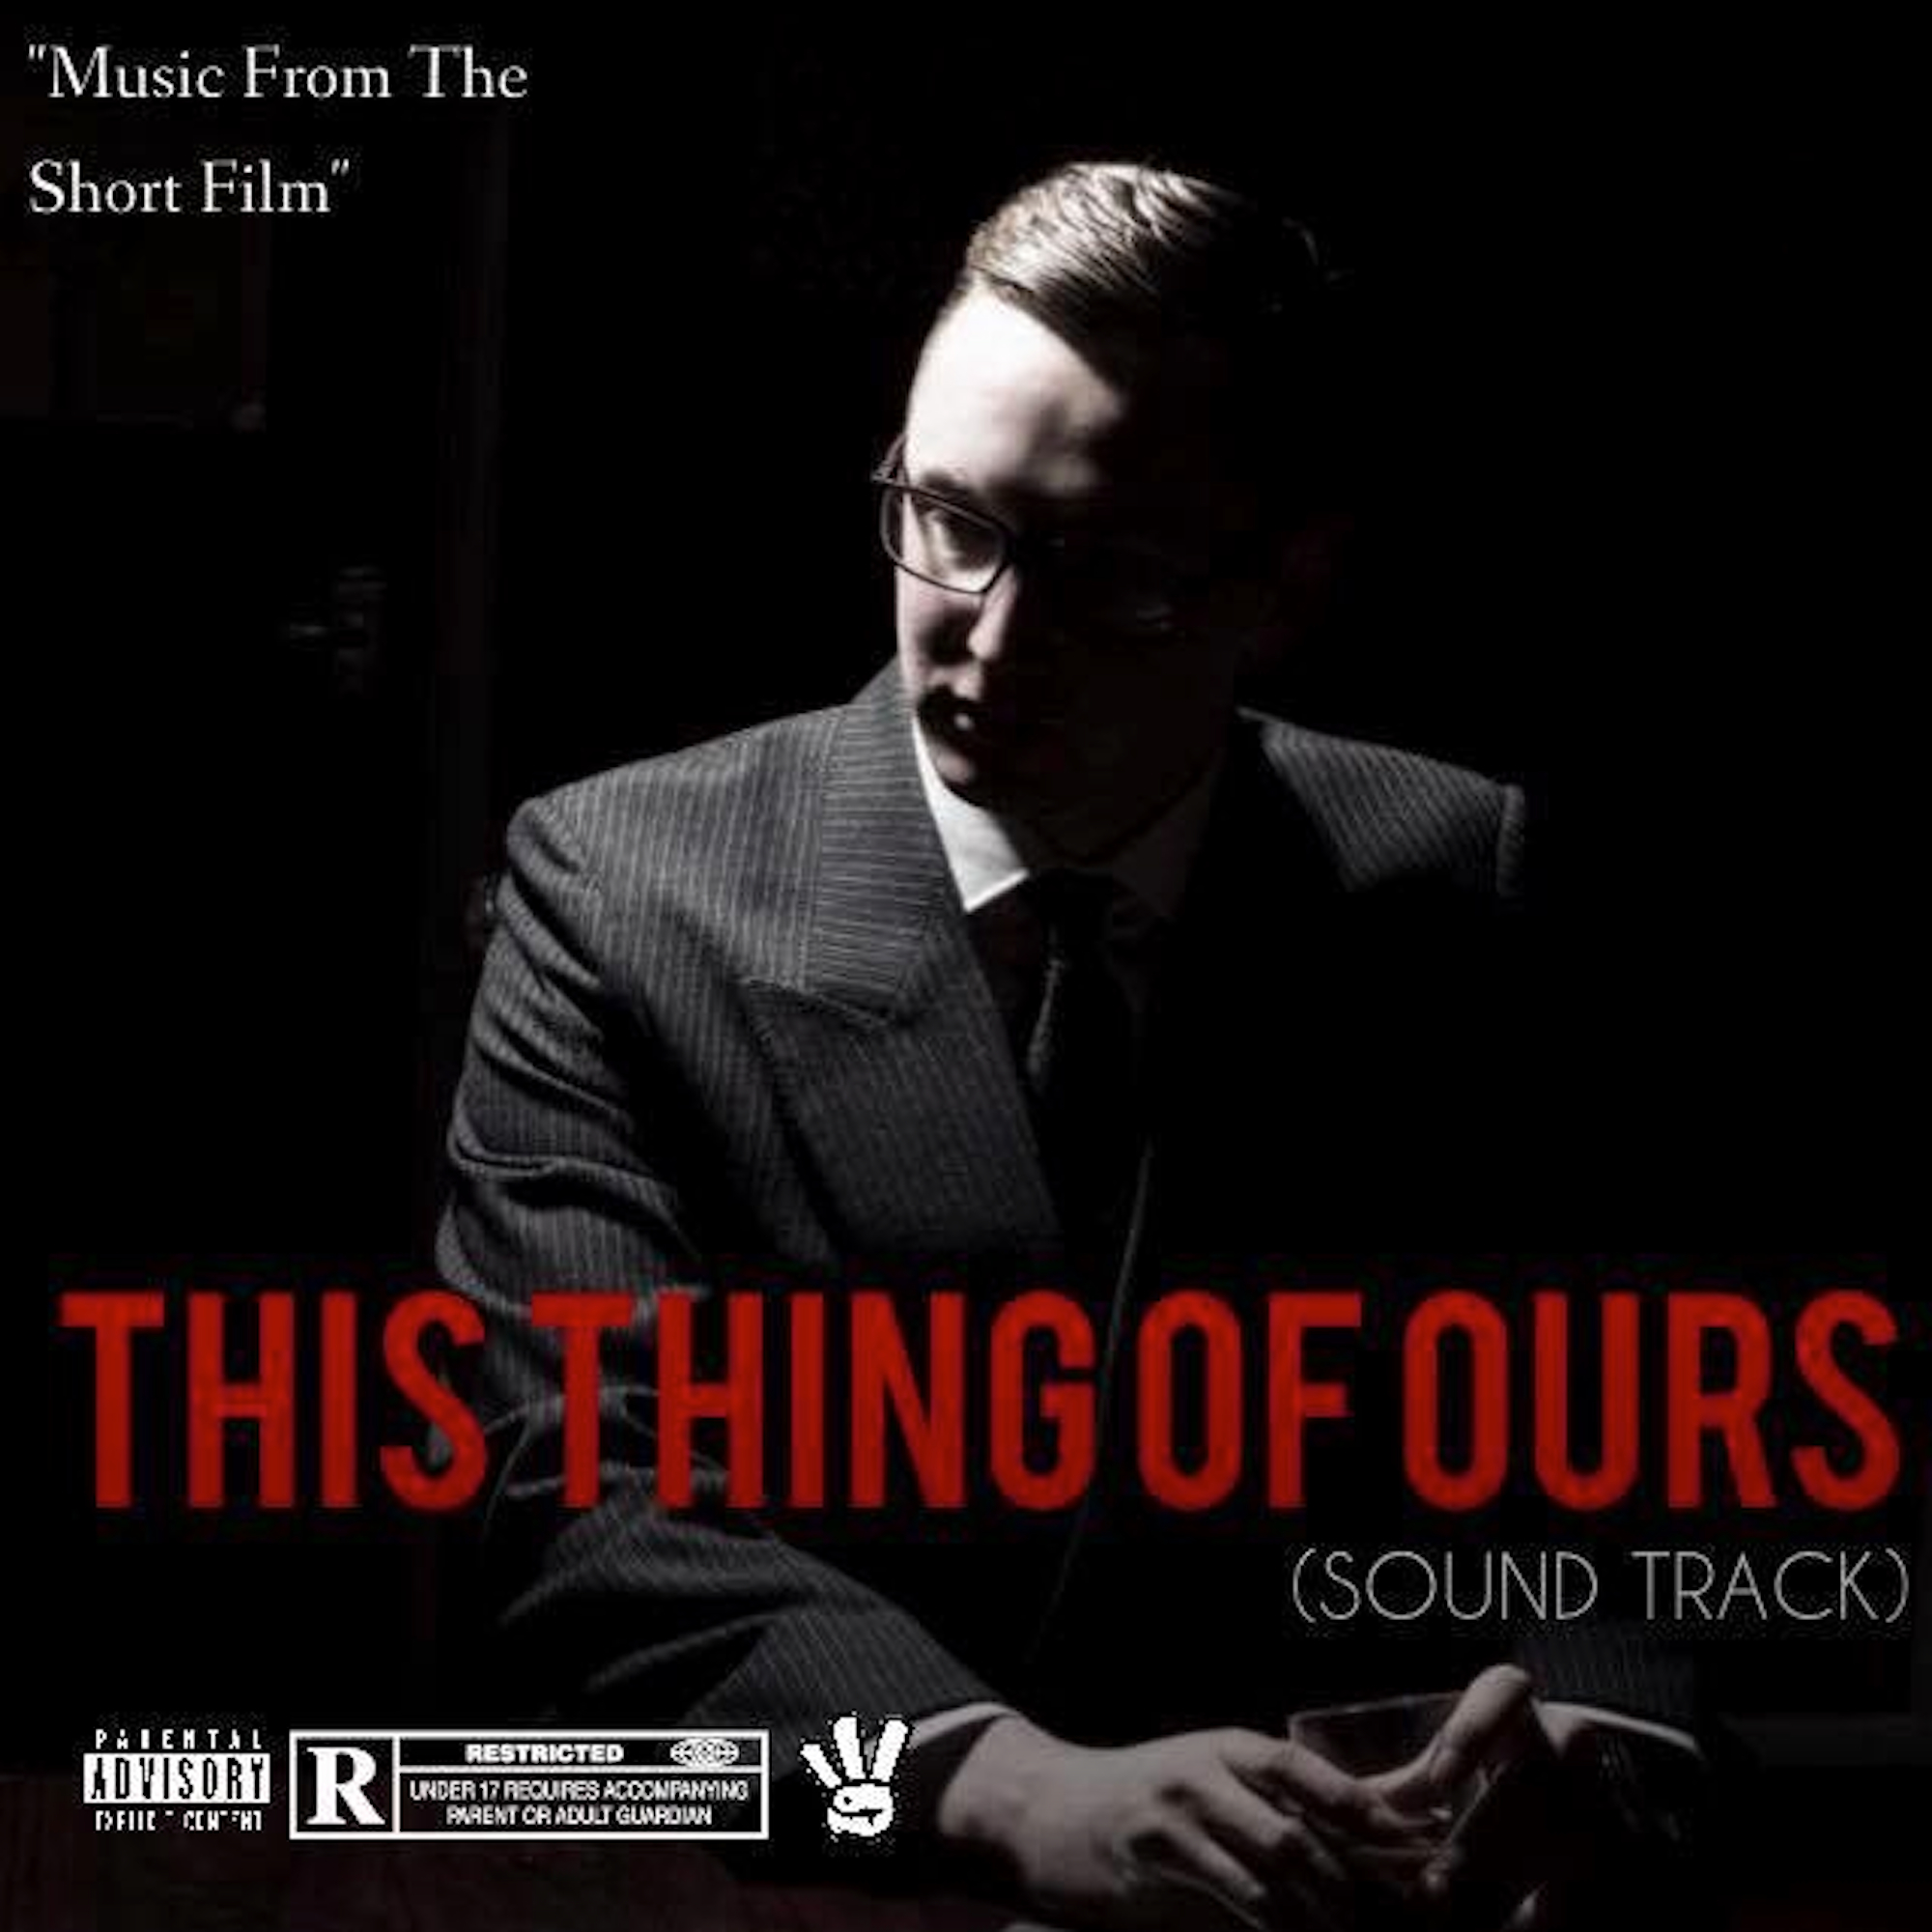 Confessions Music from Short Film " This Things of Ours